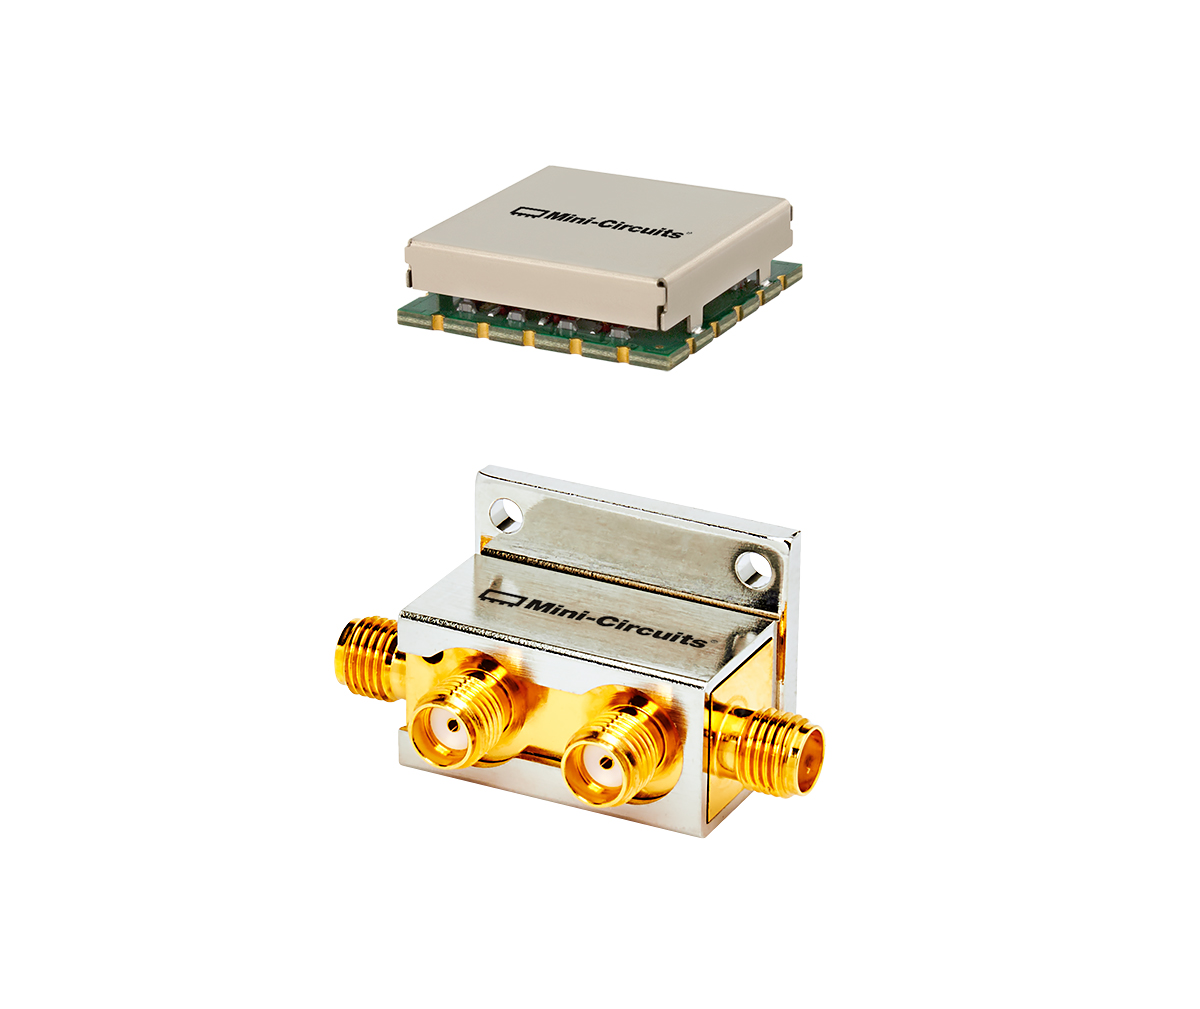 One surface mount triplexer and one coaxial triplexer